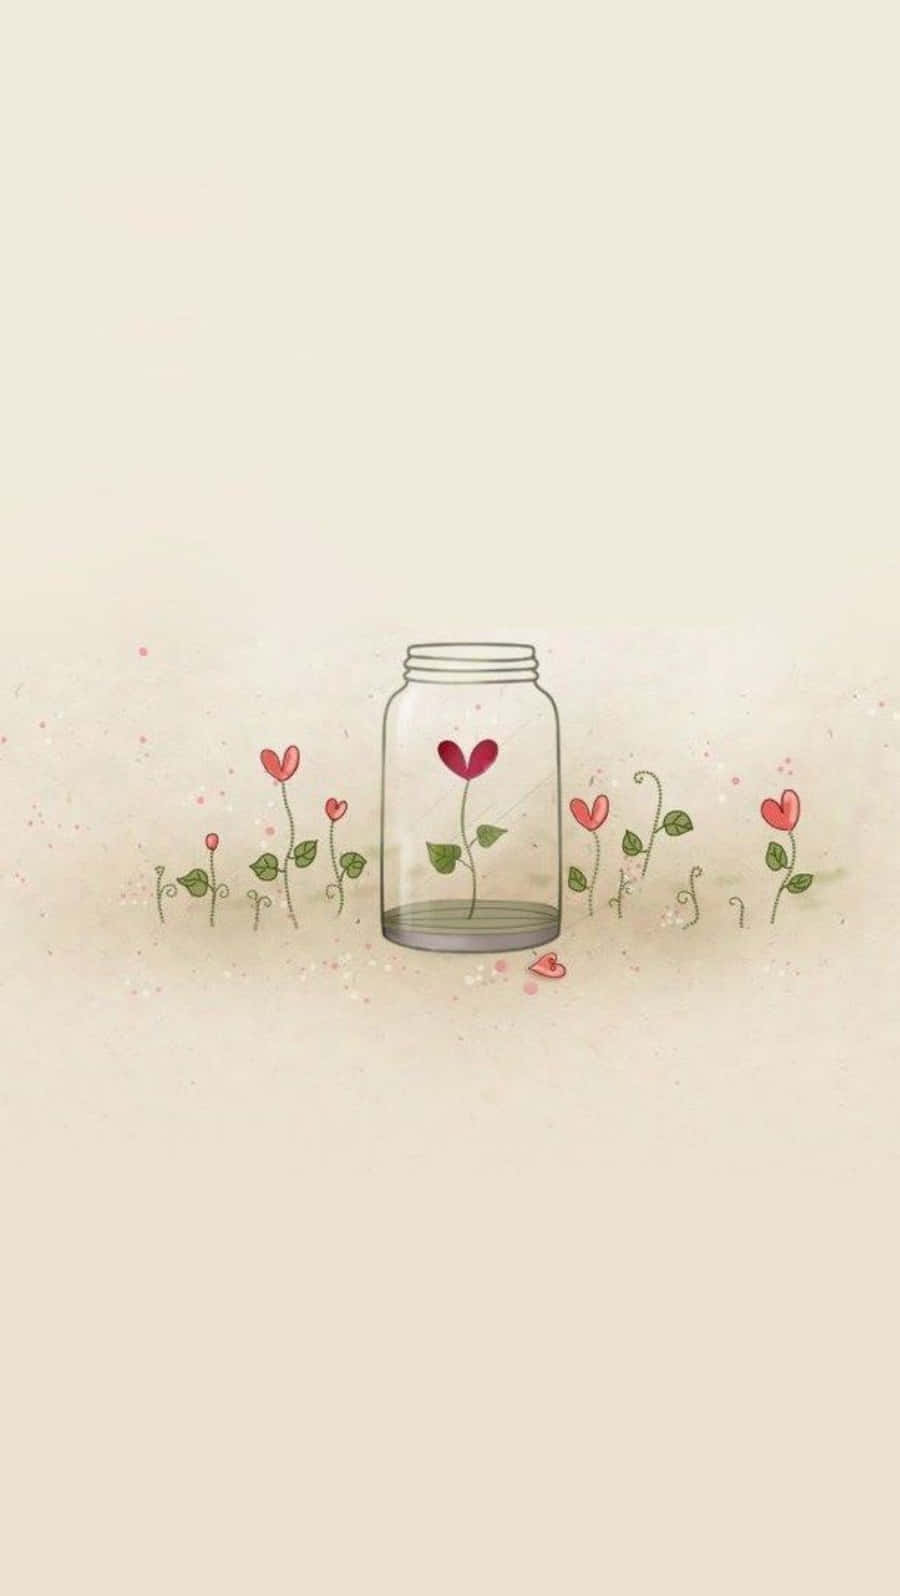 Cute Heart Jar Drawing Picture